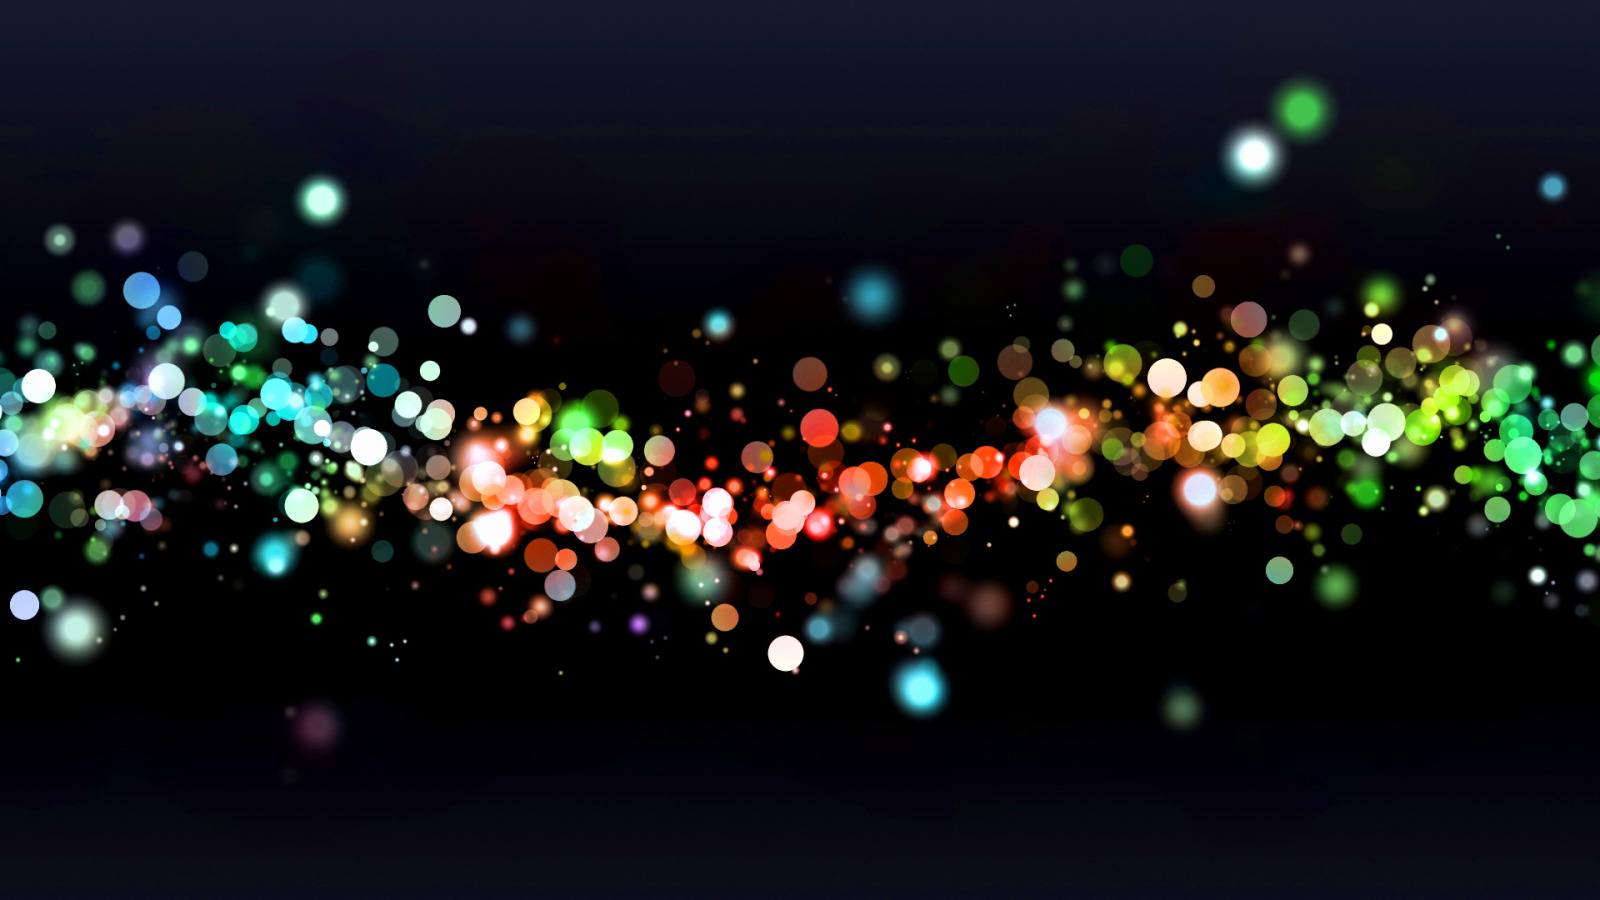 Abstract Light Wallpaper 3942 Hd Wallpapers in Abstract   Imagescicom